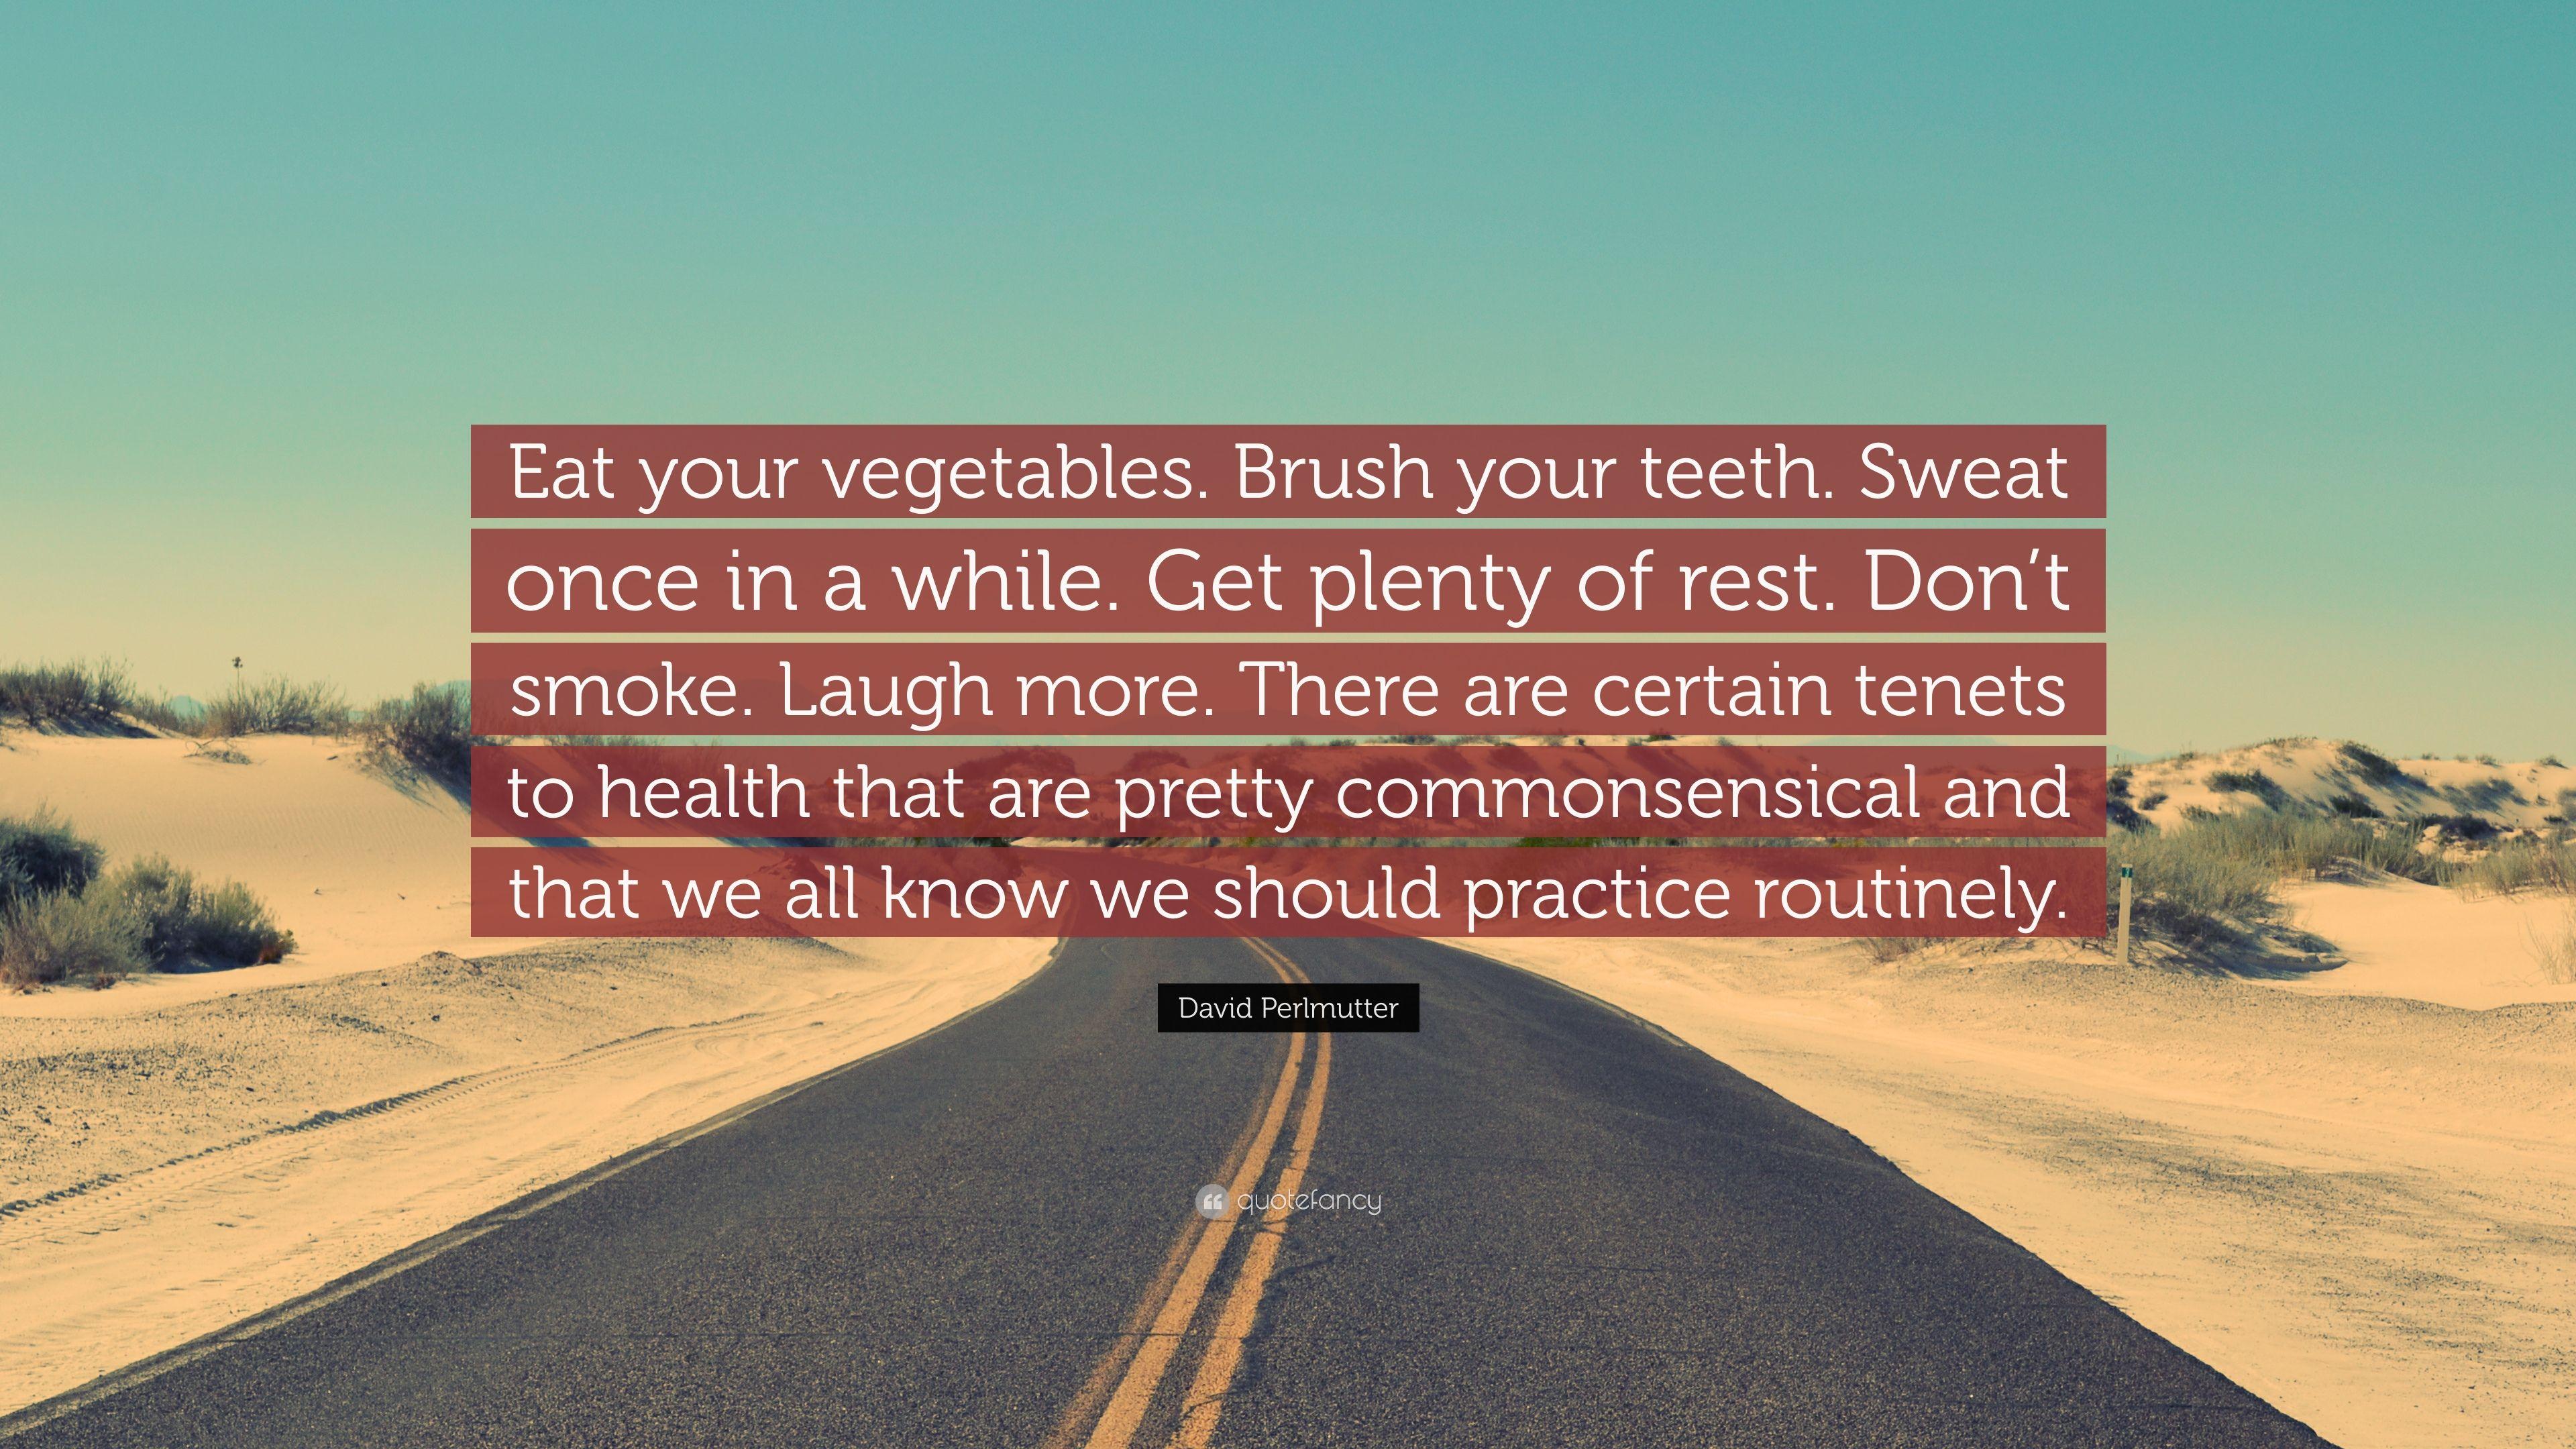 David Perlmutter Quote: “Eat your vegetables. Brush your teeth